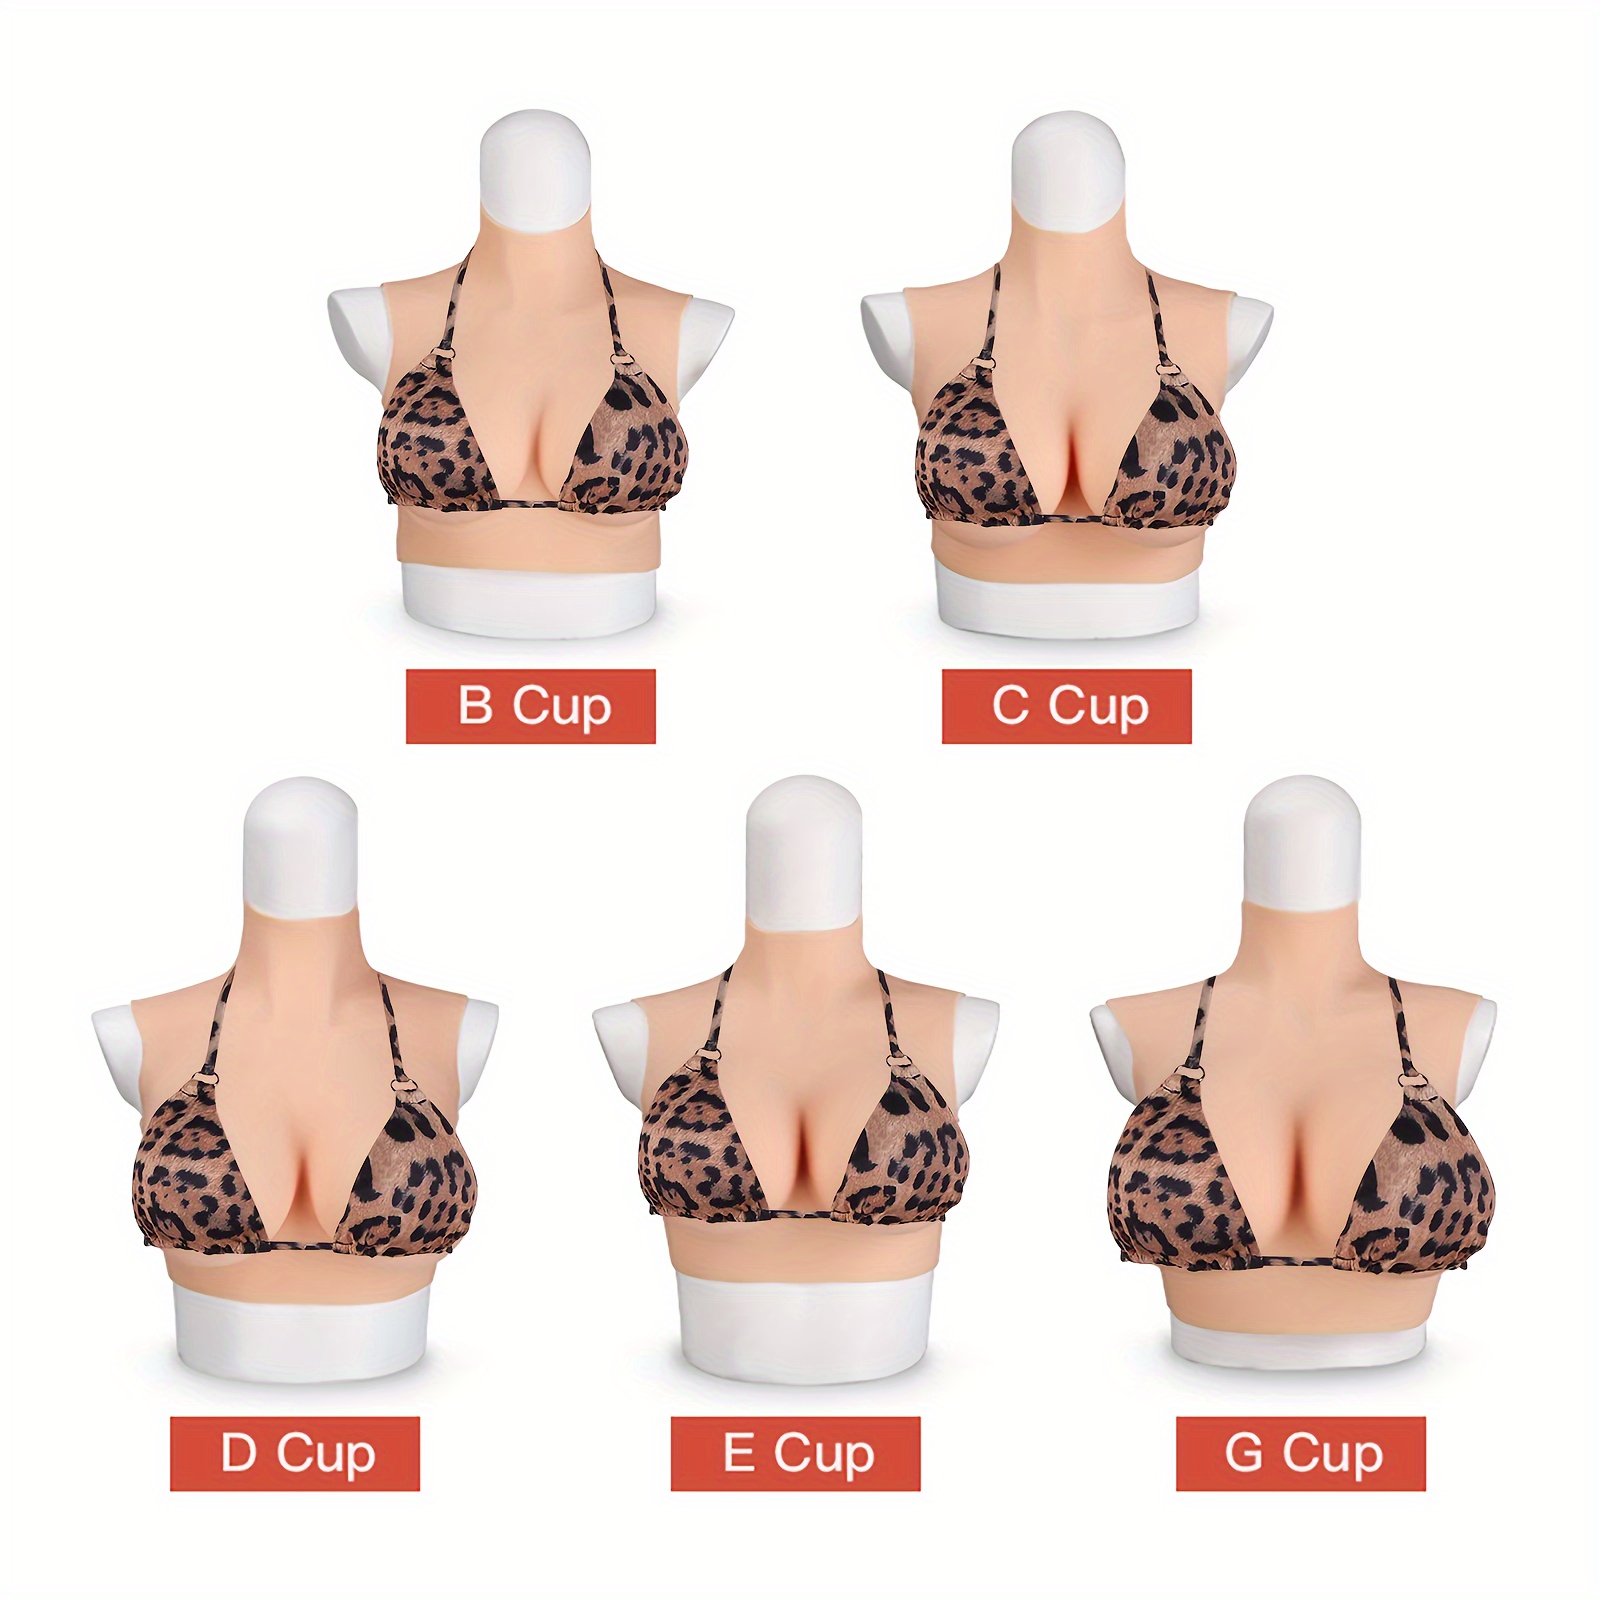 E Cup Full Body Silicone Breast Forms Transgender Fake Boobs